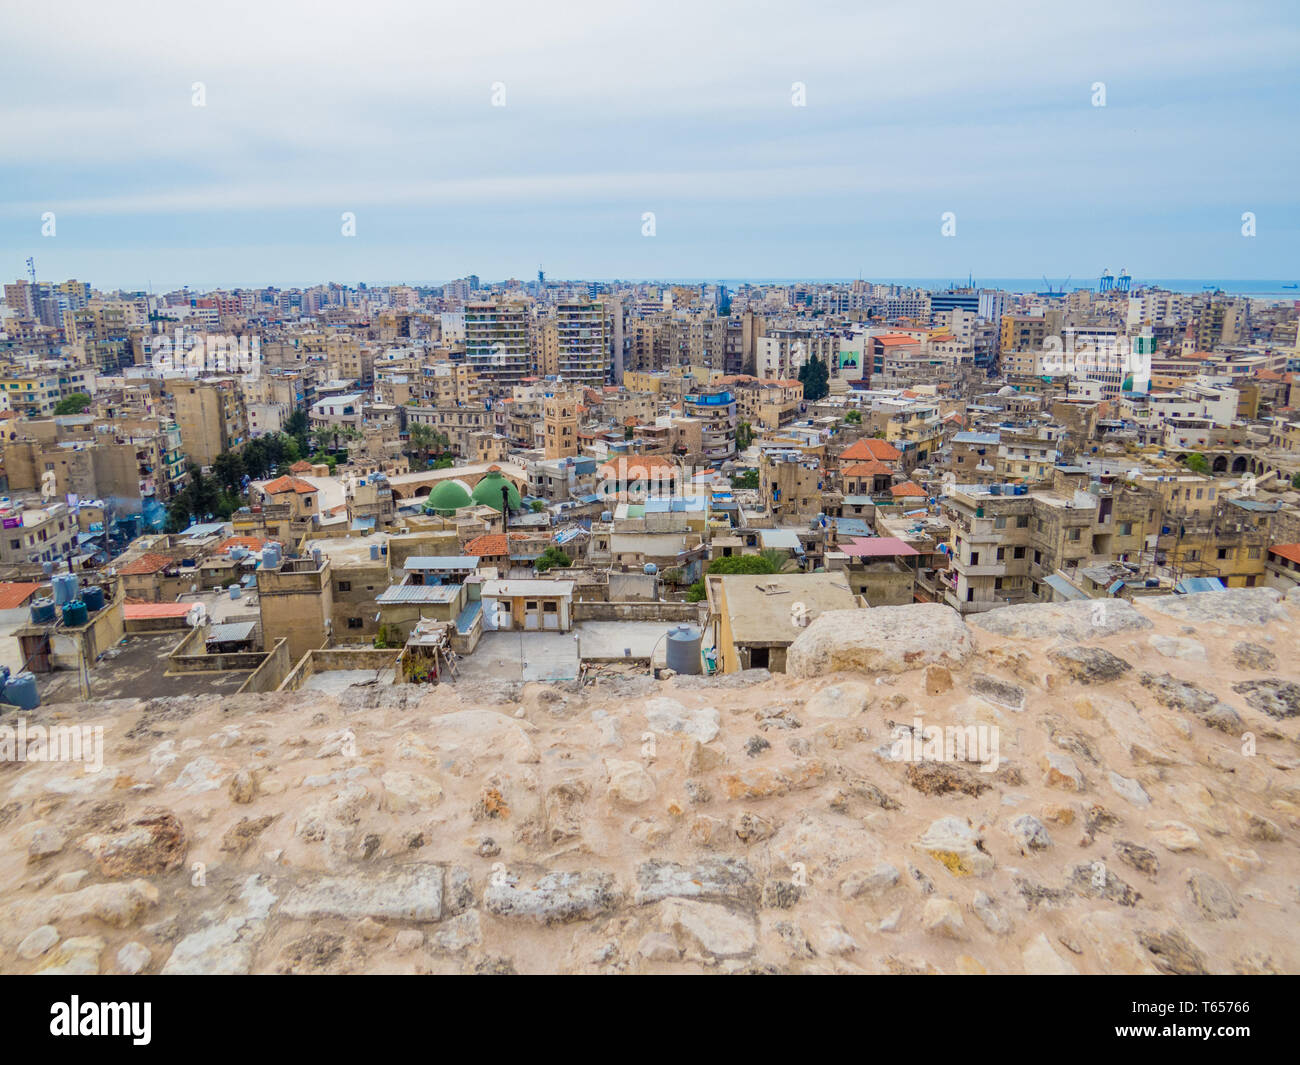 TRIPOLI, LEBANON - MAY 25, 2017: City aerial view from the Tripoli Castle. Stock Photo